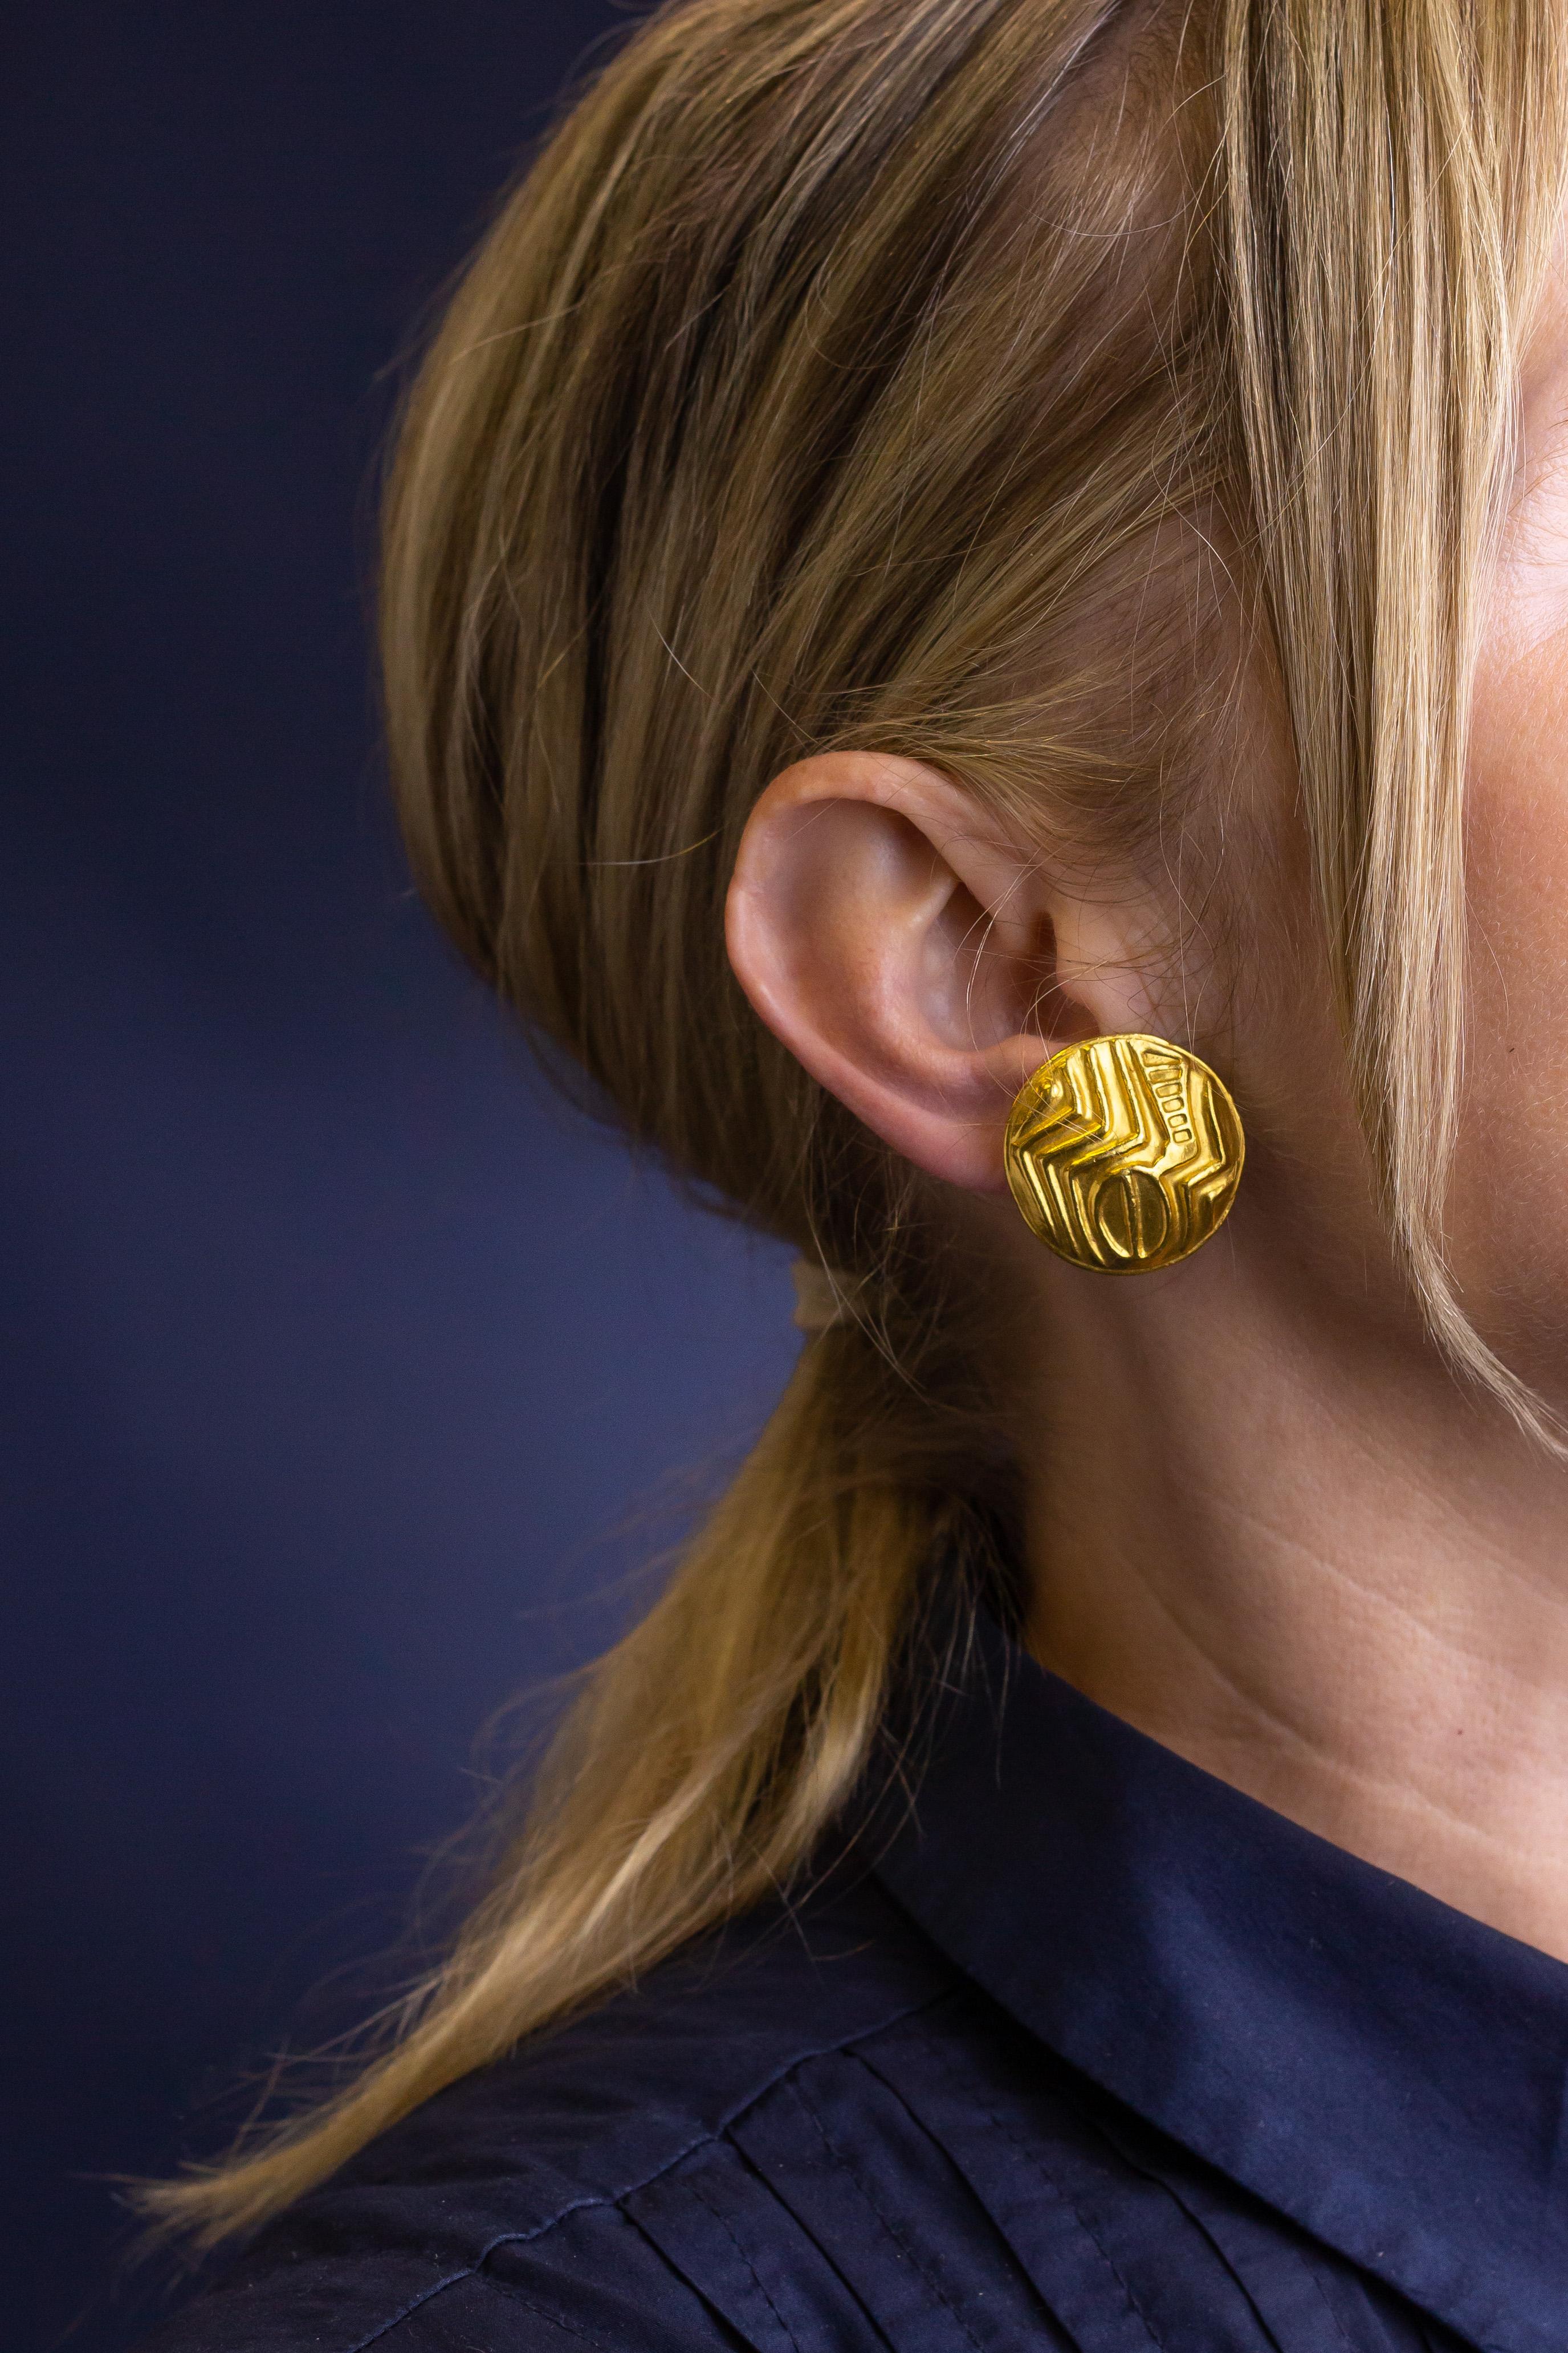 We adore the work of Greek jeweller Ilias Lalaounis and are so excited to have this pair of 'Spartan Disc' ear clips currently on offer. The pair of round ear clips are crafted from 18 karat yellow gold and look a little like a 'shield' used in